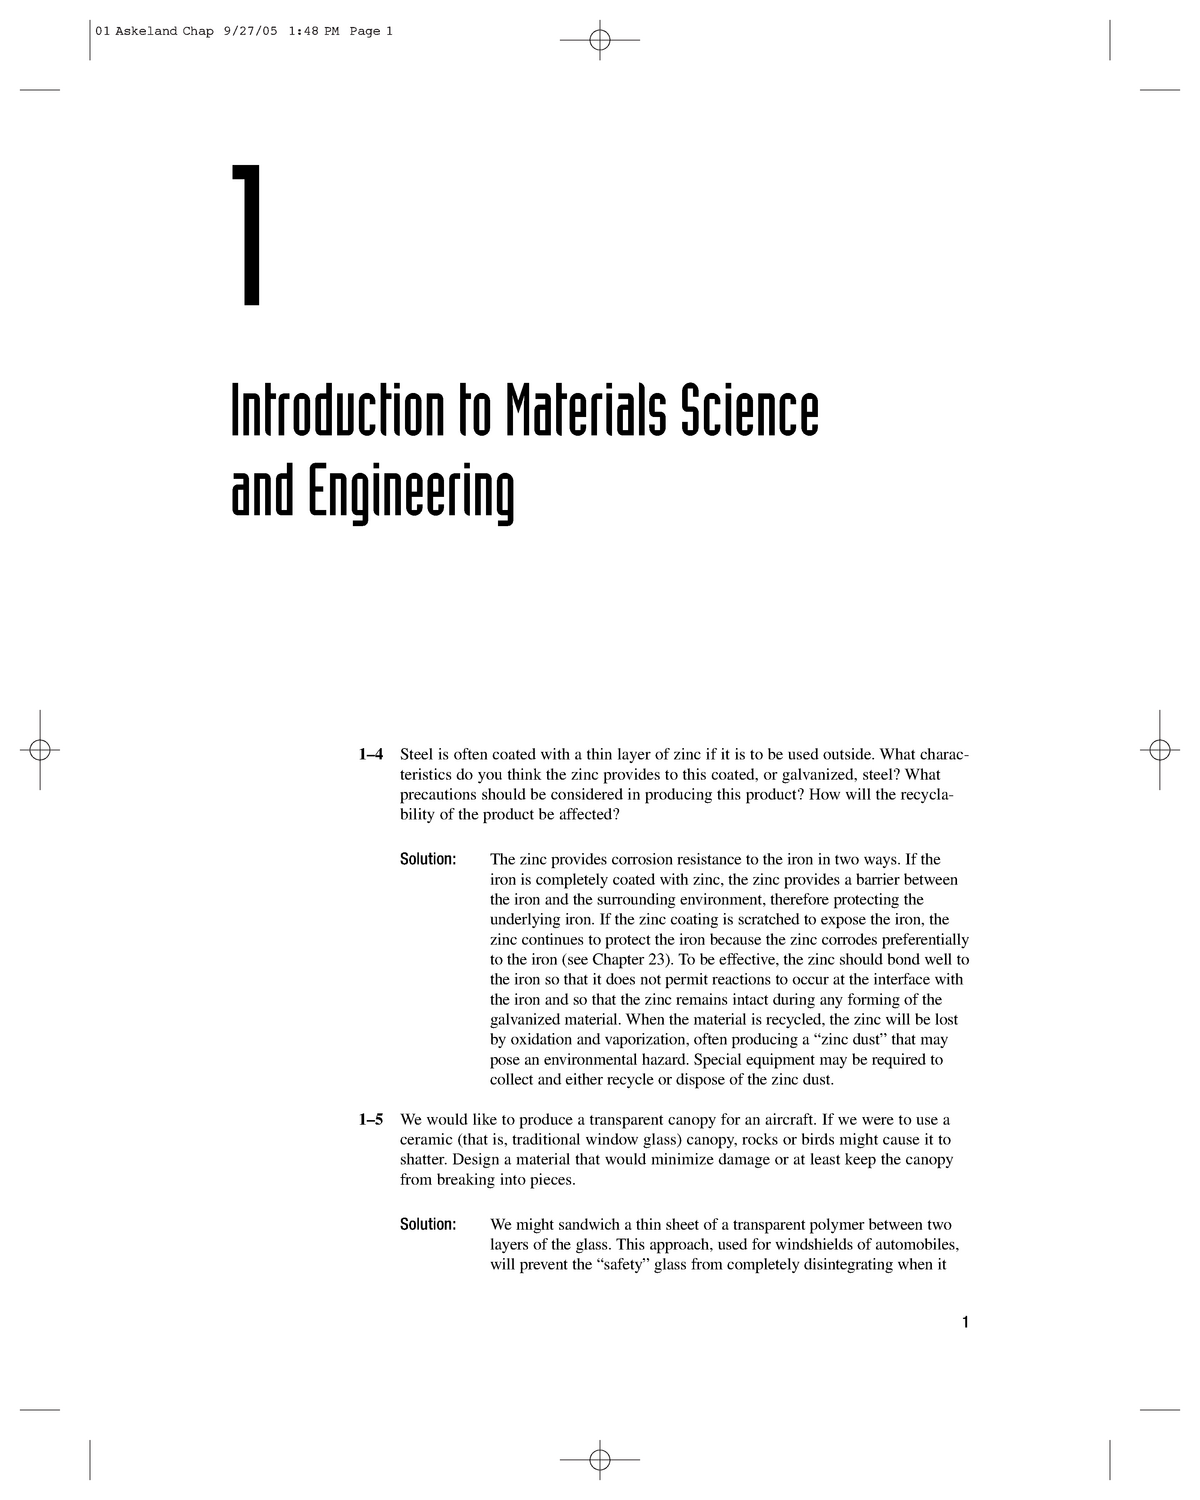 case study about materials science and engineering